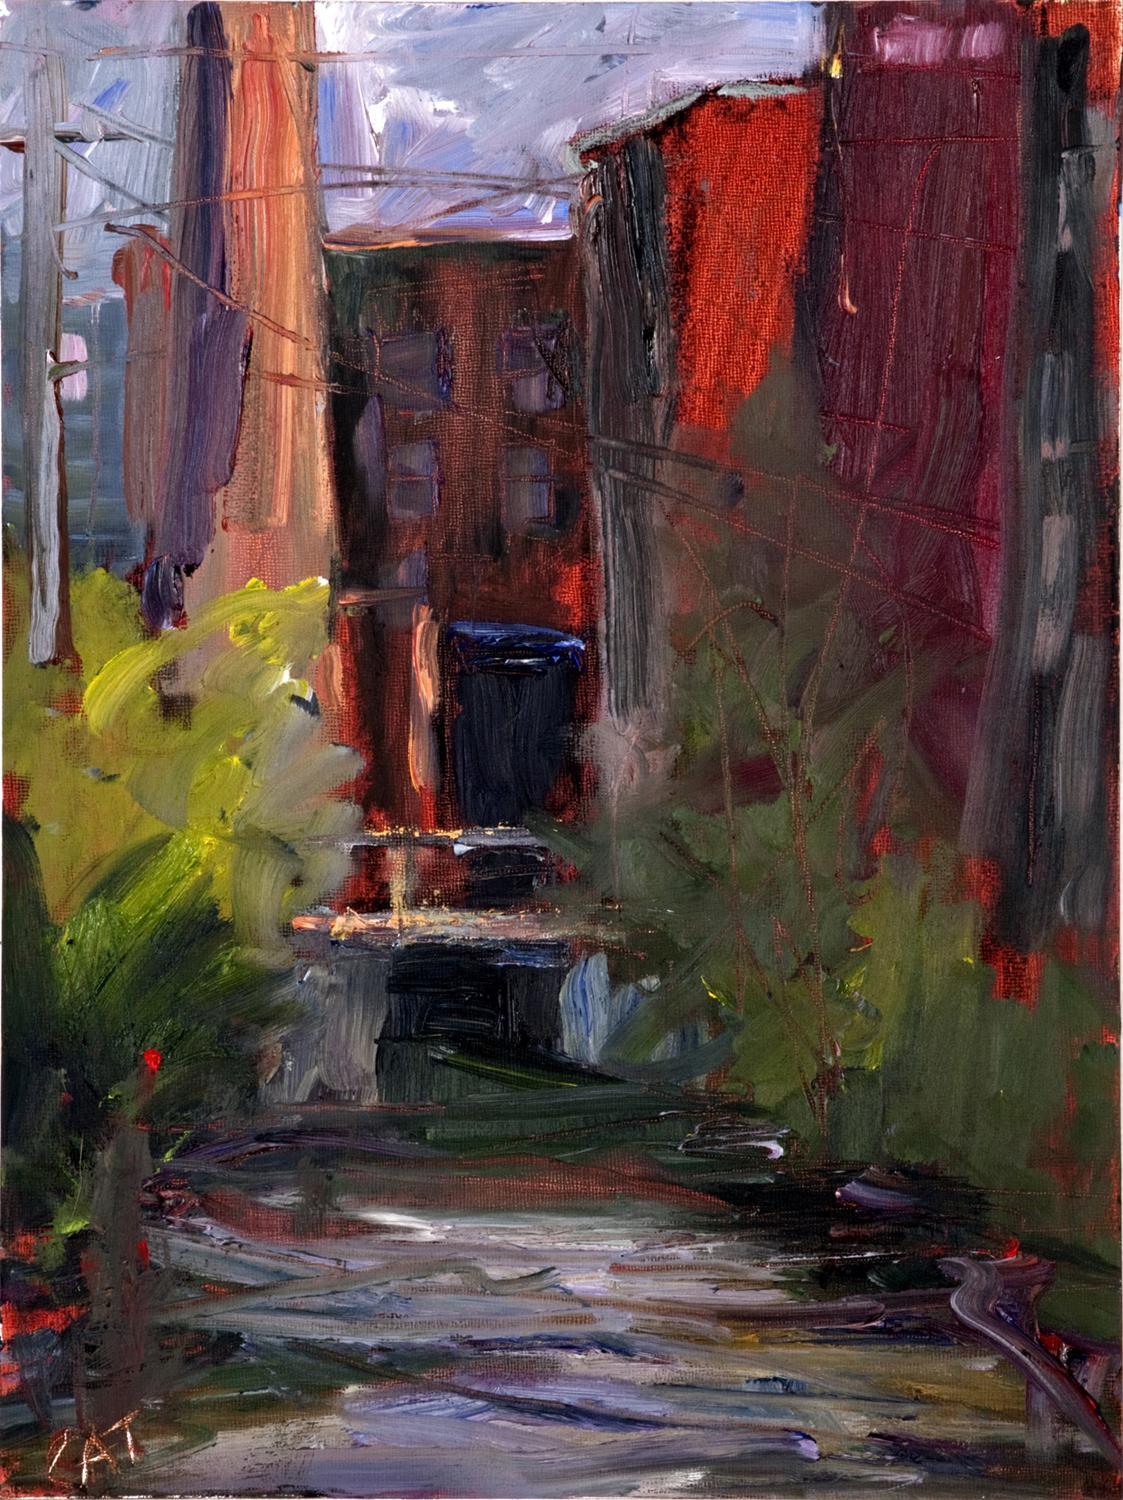 "Studio Canal", urban, factory, textural, oranges, reds, blue, oil painting - Painting by Catherine Picard-Gibbs